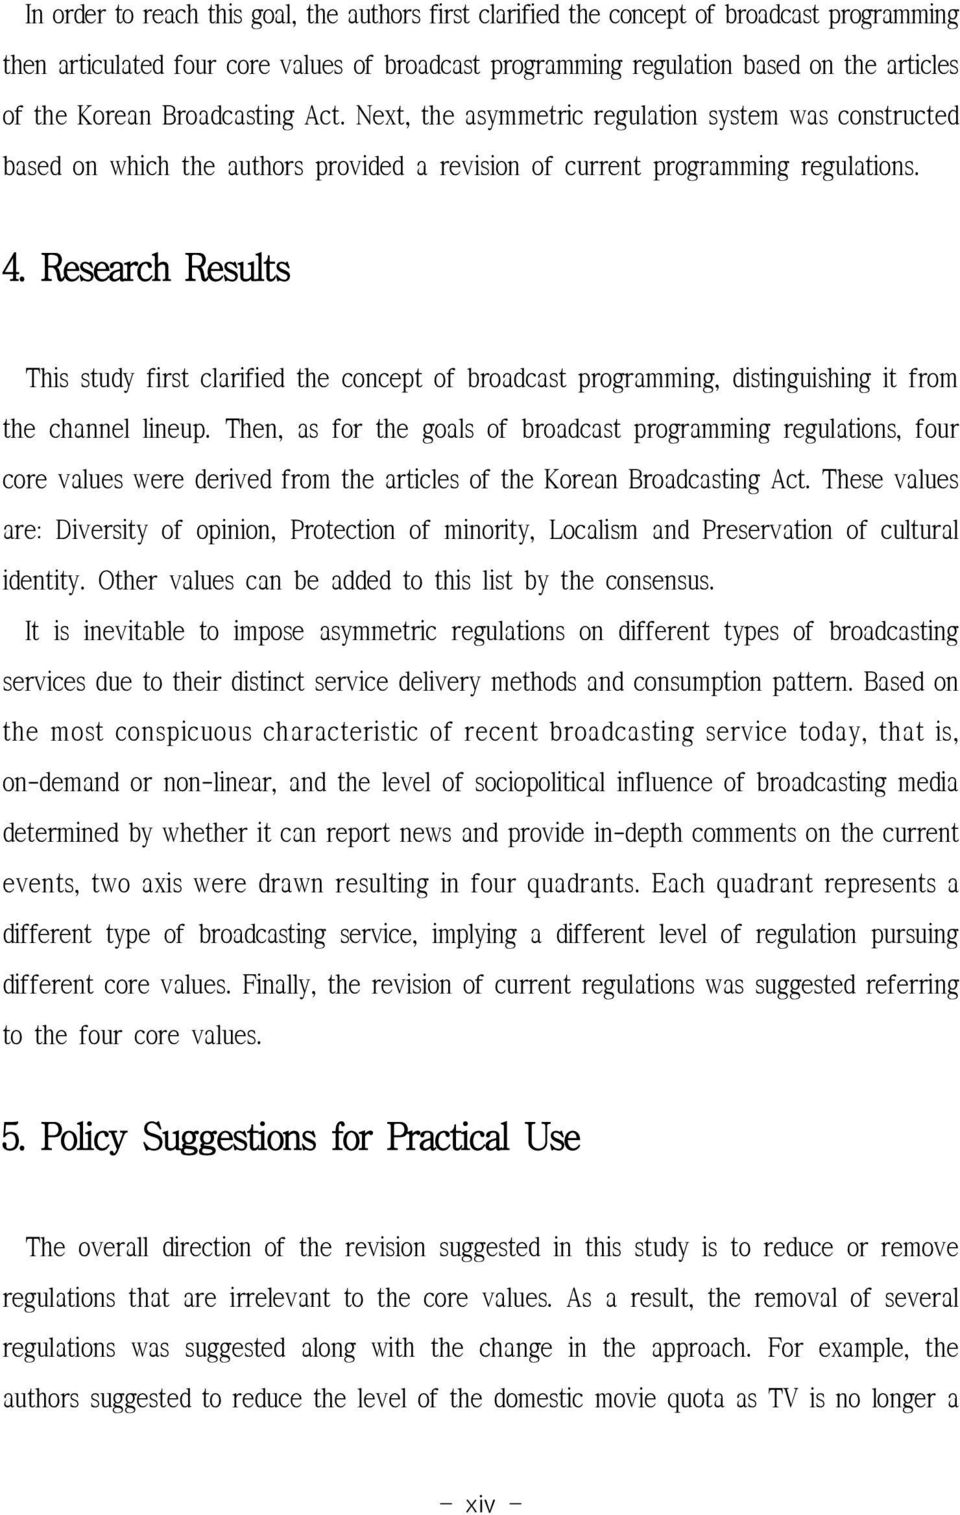 Research Results This study first clarified the concept of broadcast programming, distinguishing it from the channel lineup.